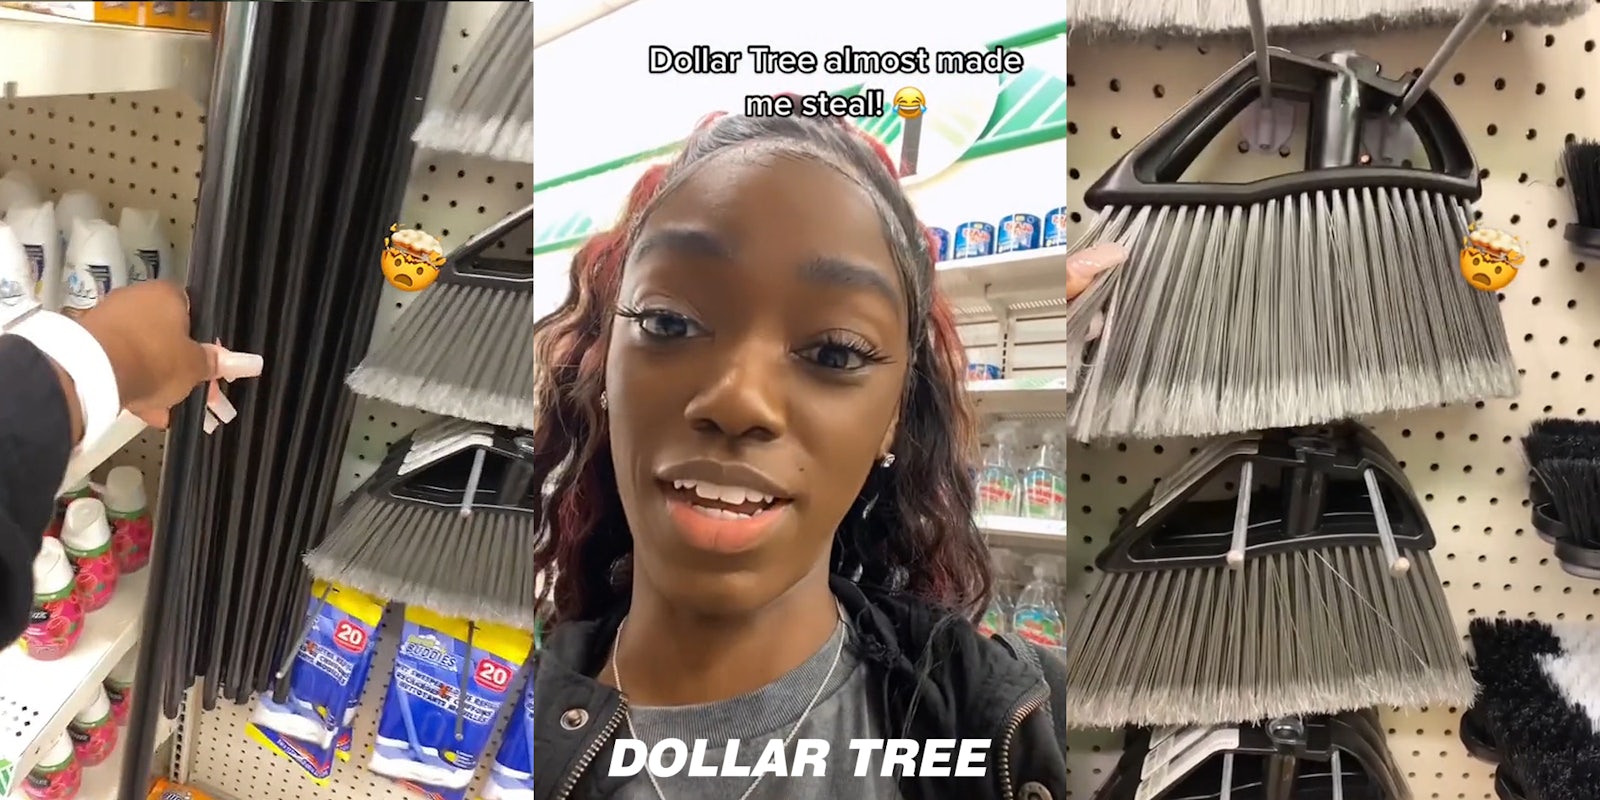 woman holding broom stick from Dollar Tree (l) woman speaking in Dollar Tree with caption 'Dollar Tree almost made me steal!' with Dollar Tree logo at bottom (c) Dollar Tree broom brush end being held up (r)